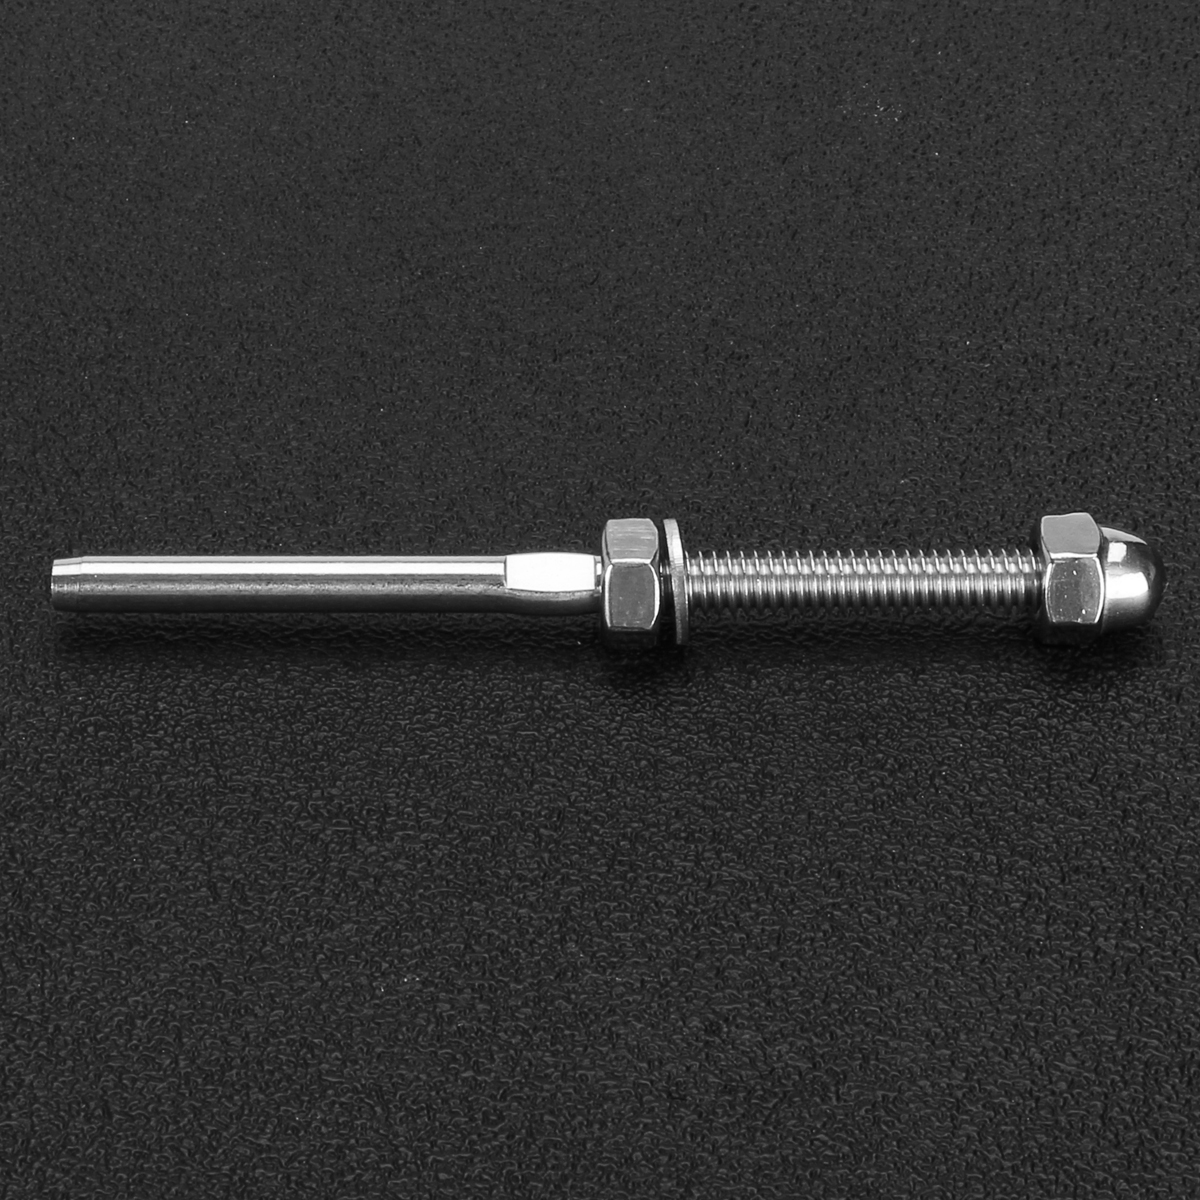 Stainless-Steel-Handrail-Railing-Cable-Tensioner-Threaded-Stud-End-Fitting-for-18-Inch-Cable-Wire-1197387-4